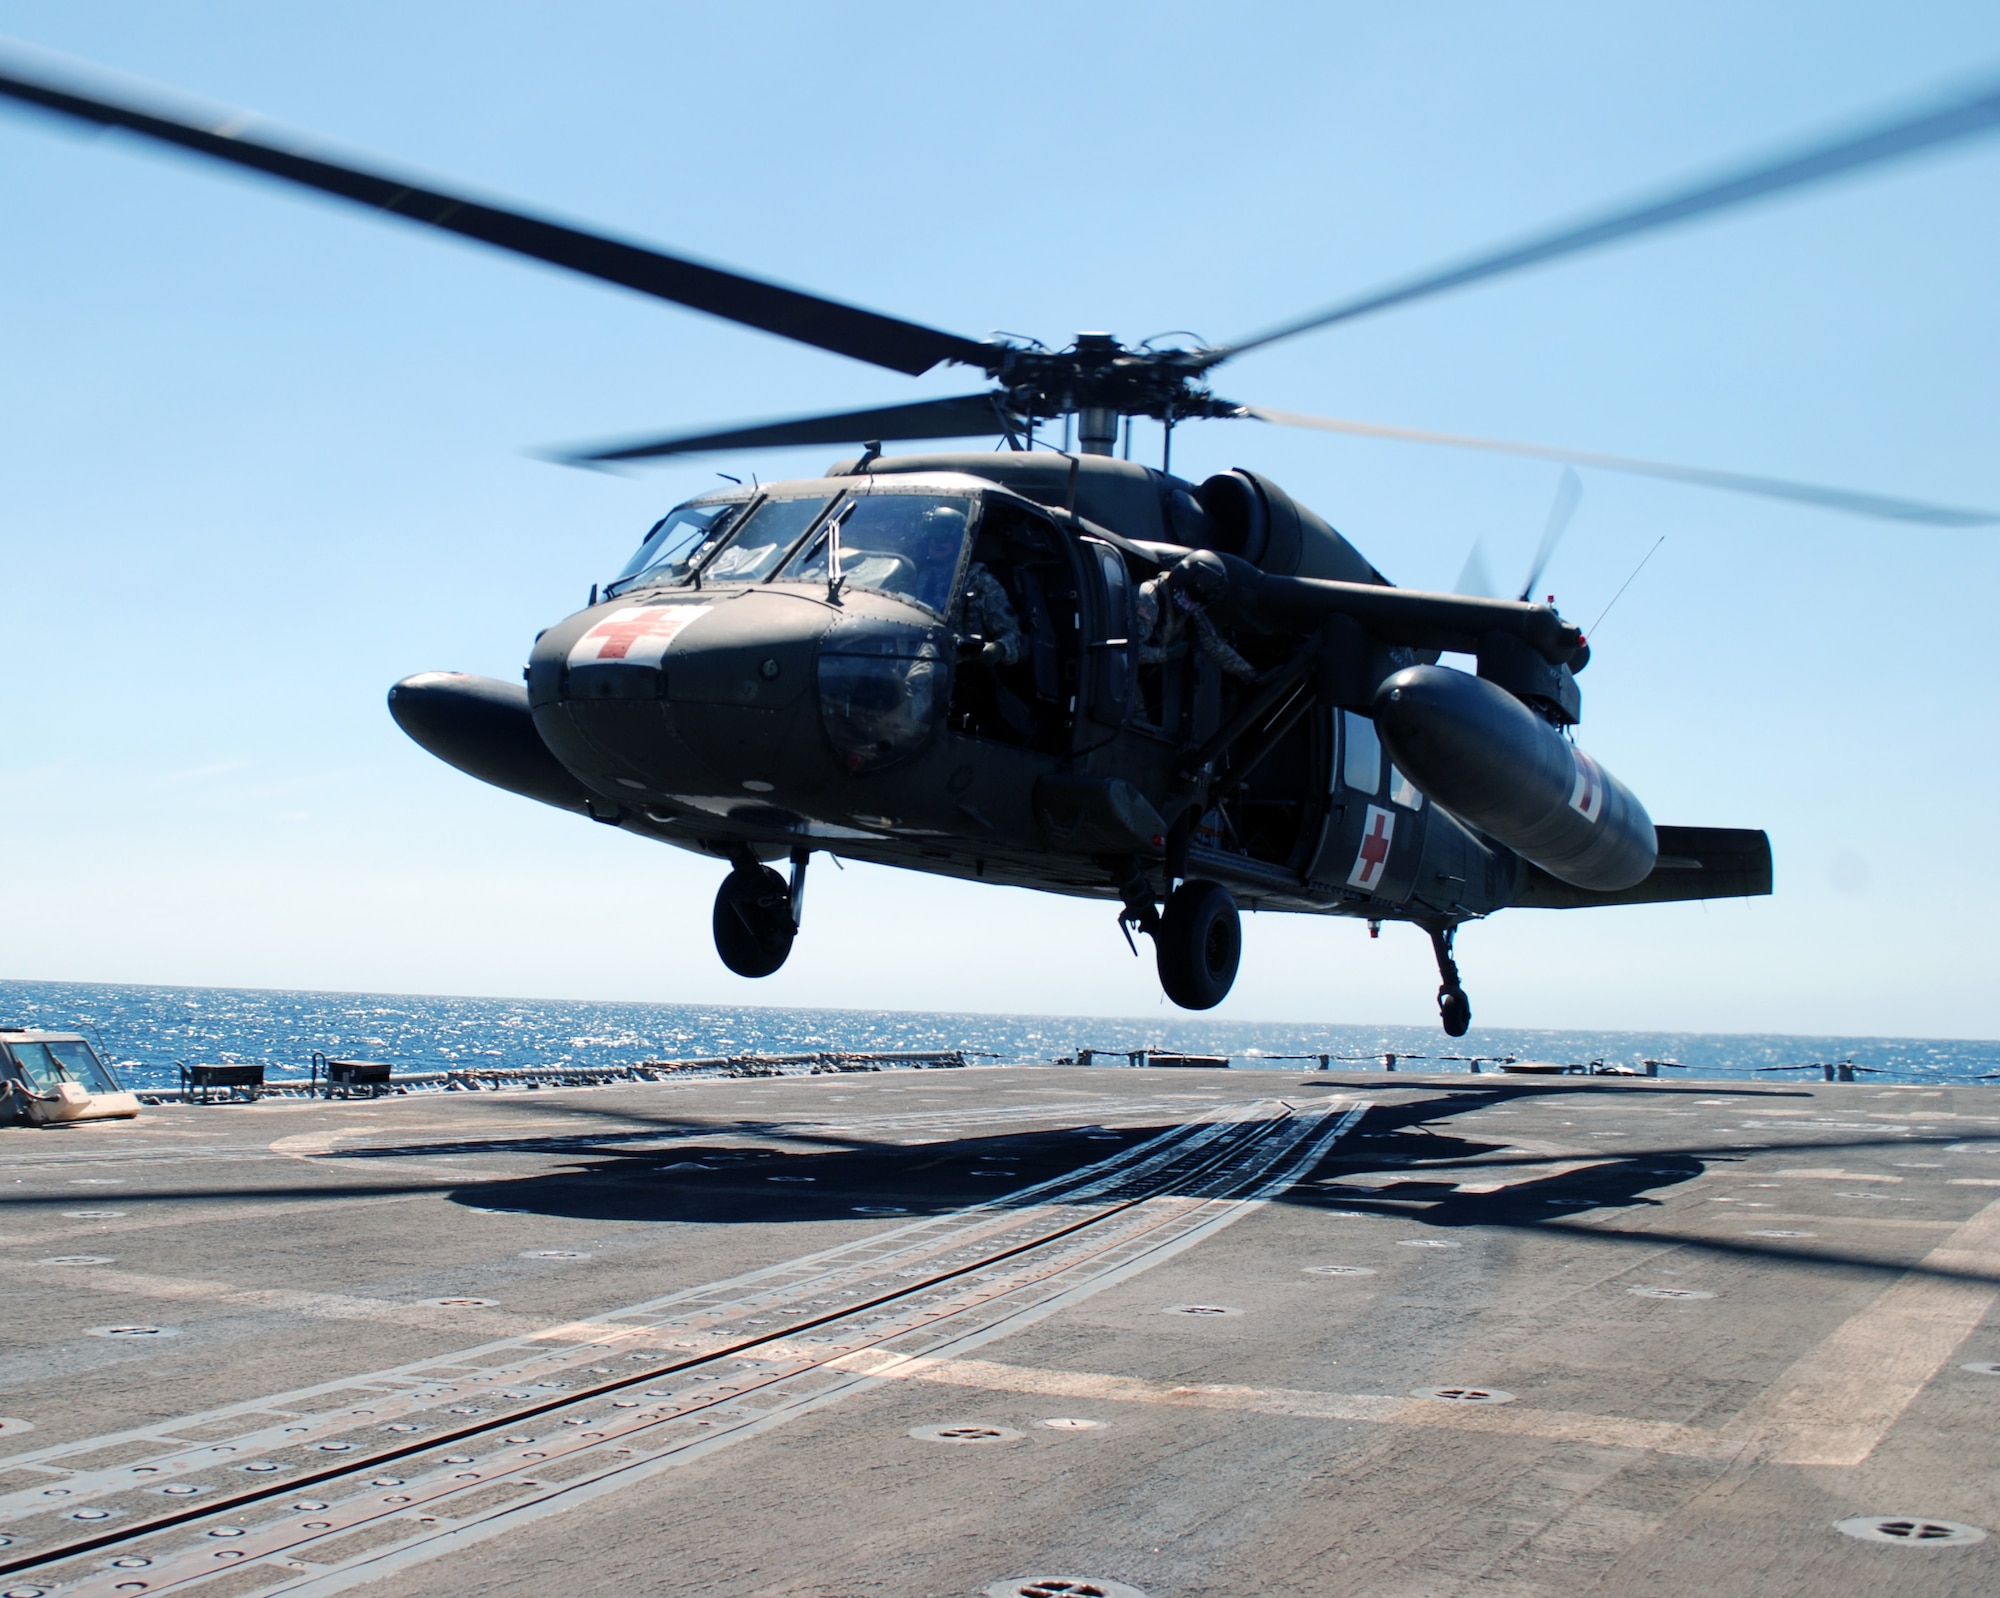 A UH-60 Blackhawk helicopter assigned to Joint Task Force Bravo's 1-228th Aviation Regiment comes in for a landing on the deck of the USS Rentz during deck landing qualification training off the coast of Honduras, Feb. 8, 2014. The training, which was conducted approximately 70 miles off the coast of Honduras, was done to qualify 1-228th pilots and crew chiefs on shipboard operations. (Courtesy photo)